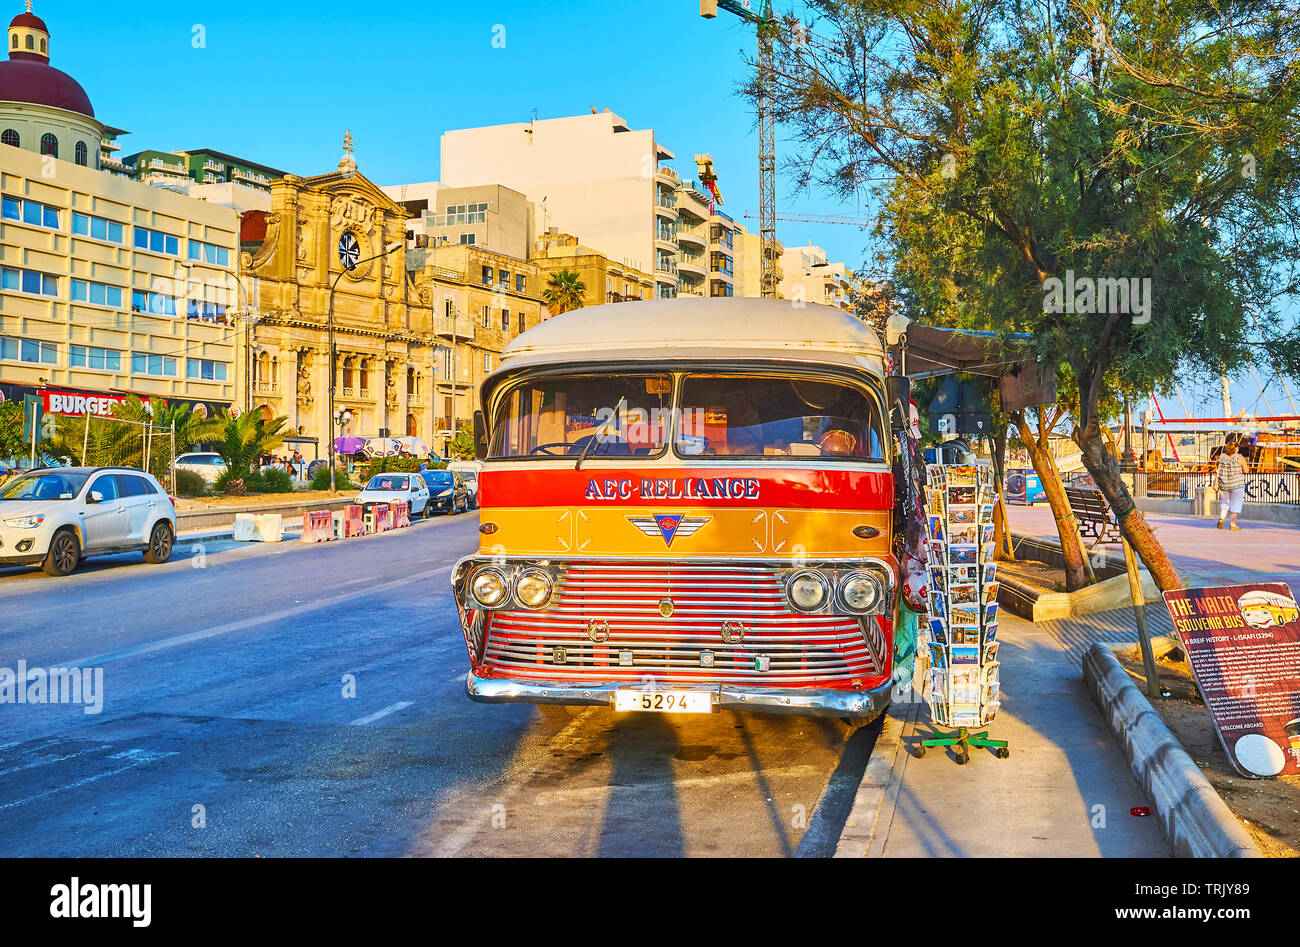 SLIEMA, MALTA - JUNE 19, 2018: The unusual souvenir store located in AEC-Reliance vintage bus, parked at the seaside promenade of resort, on June 19 i Stock Photo